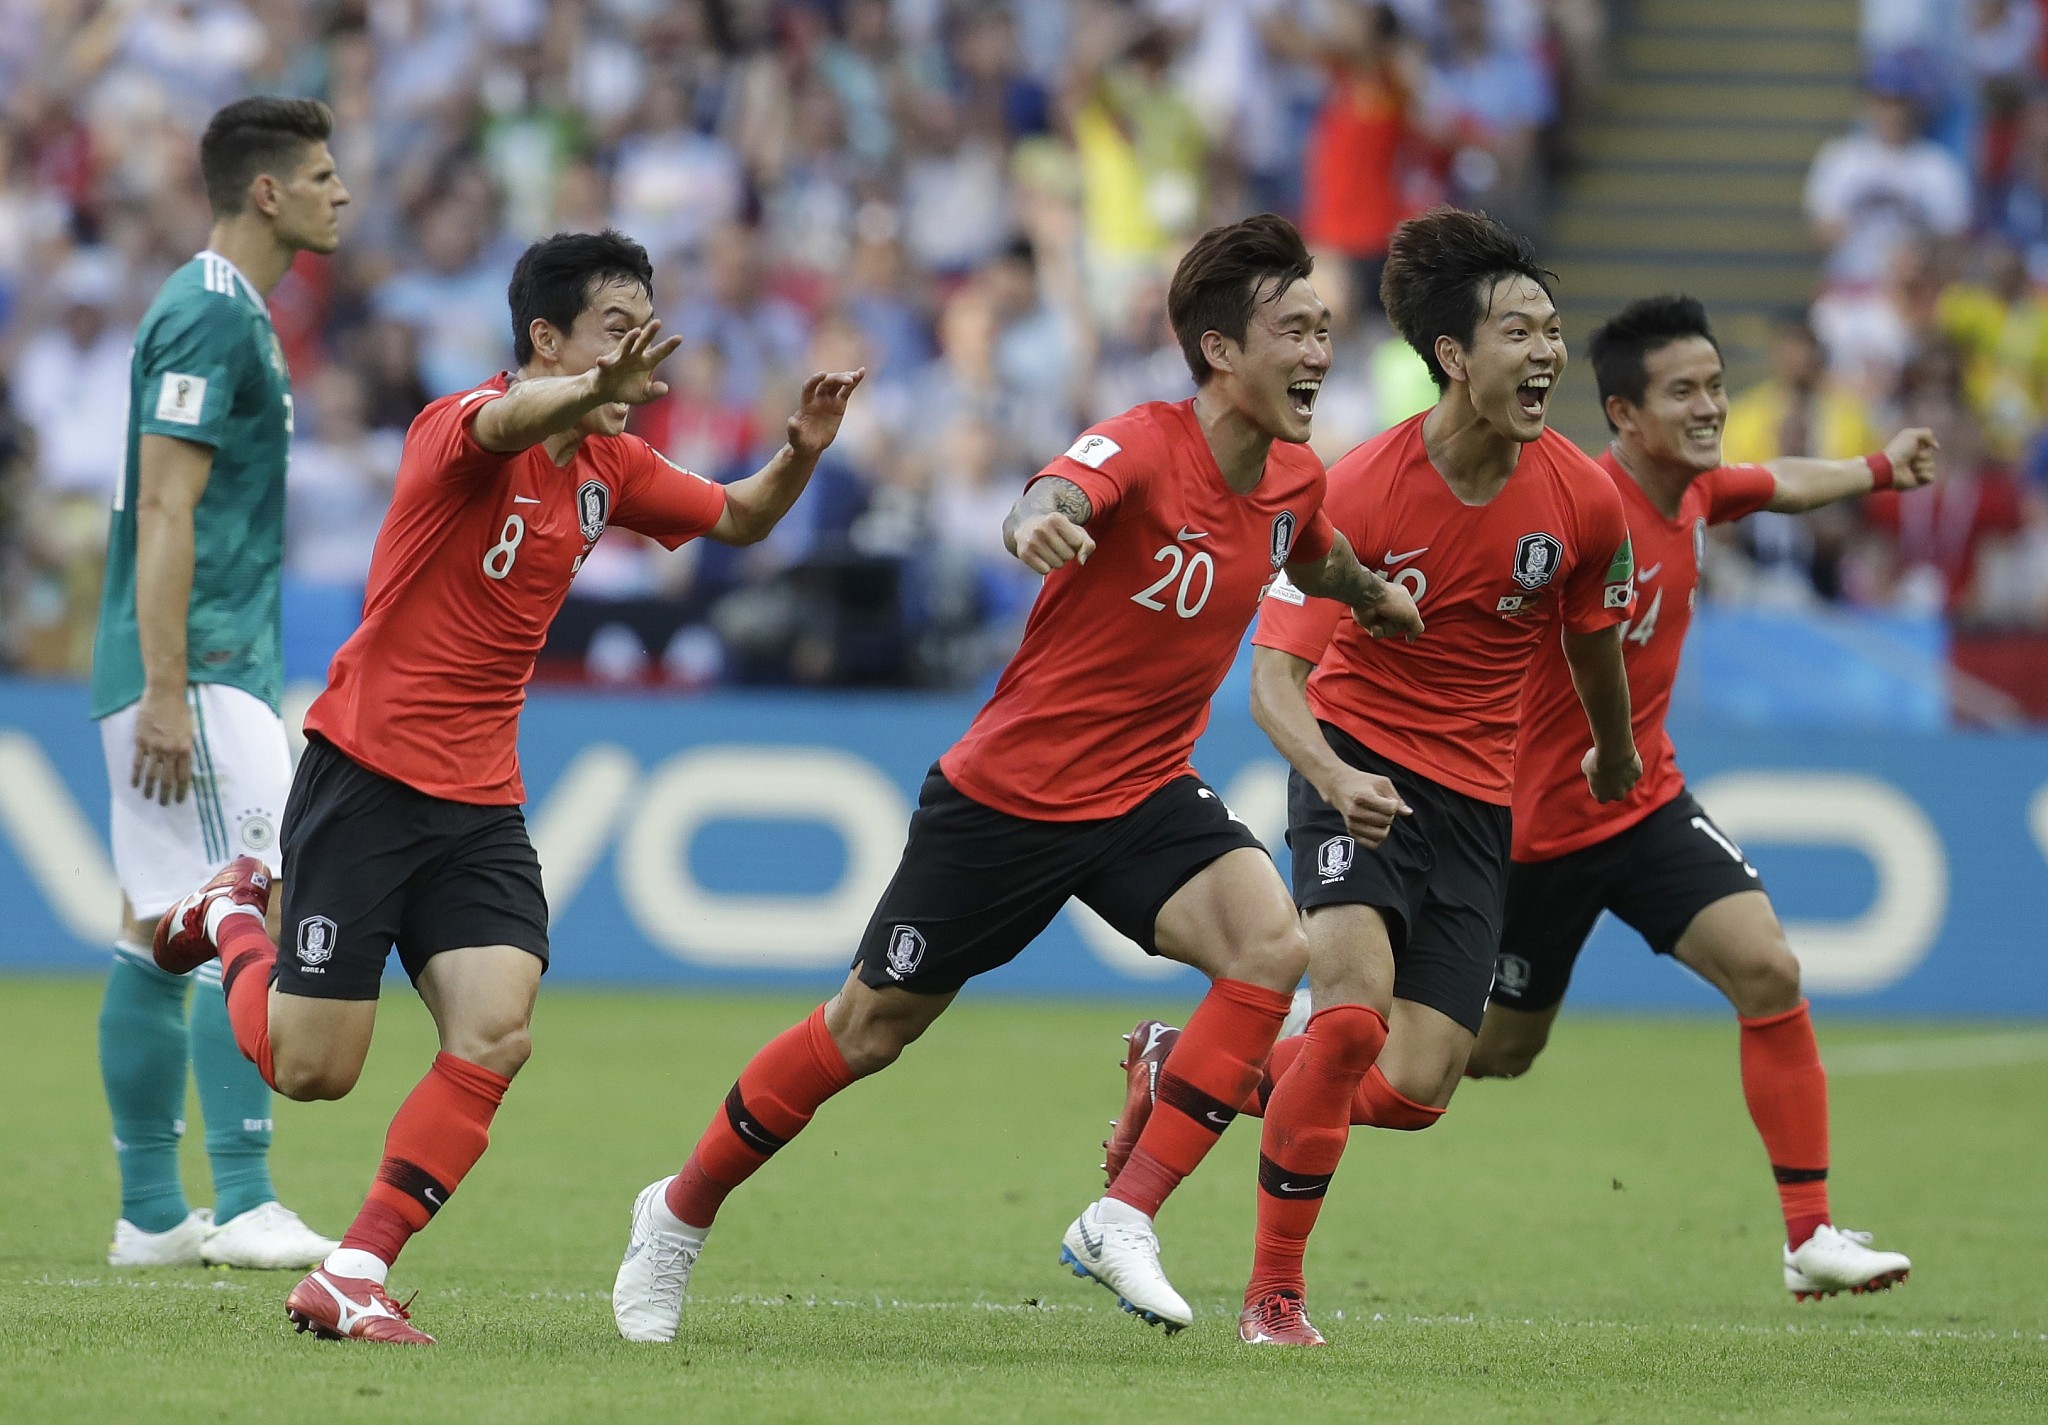 Germany crashes out of World Cup as South Korea stuns title holders